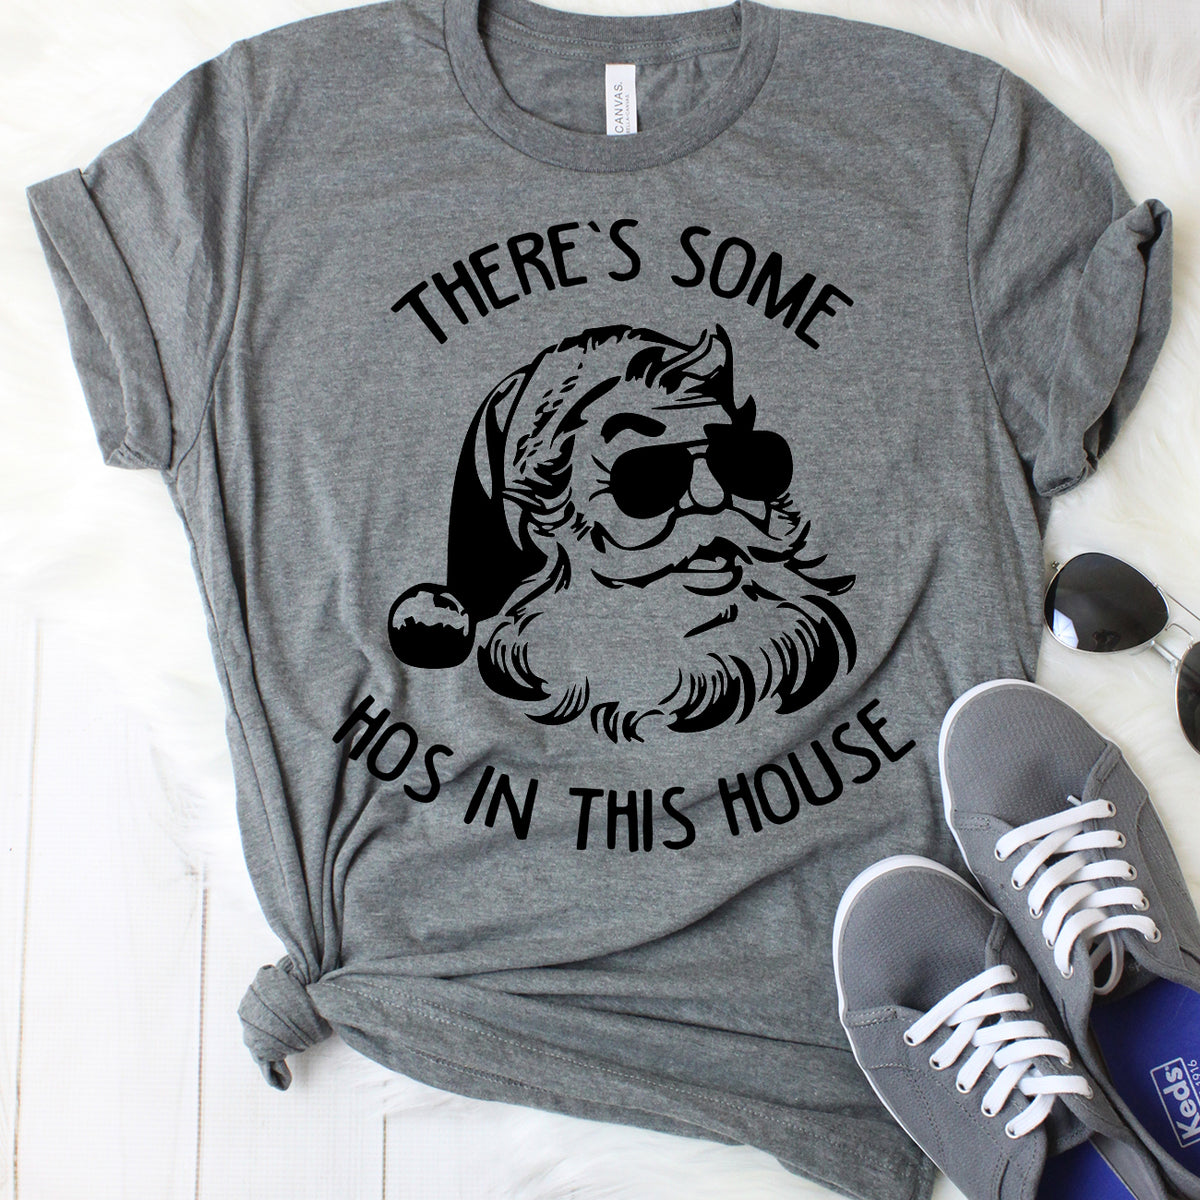 There's Some HOS in This House Shirt